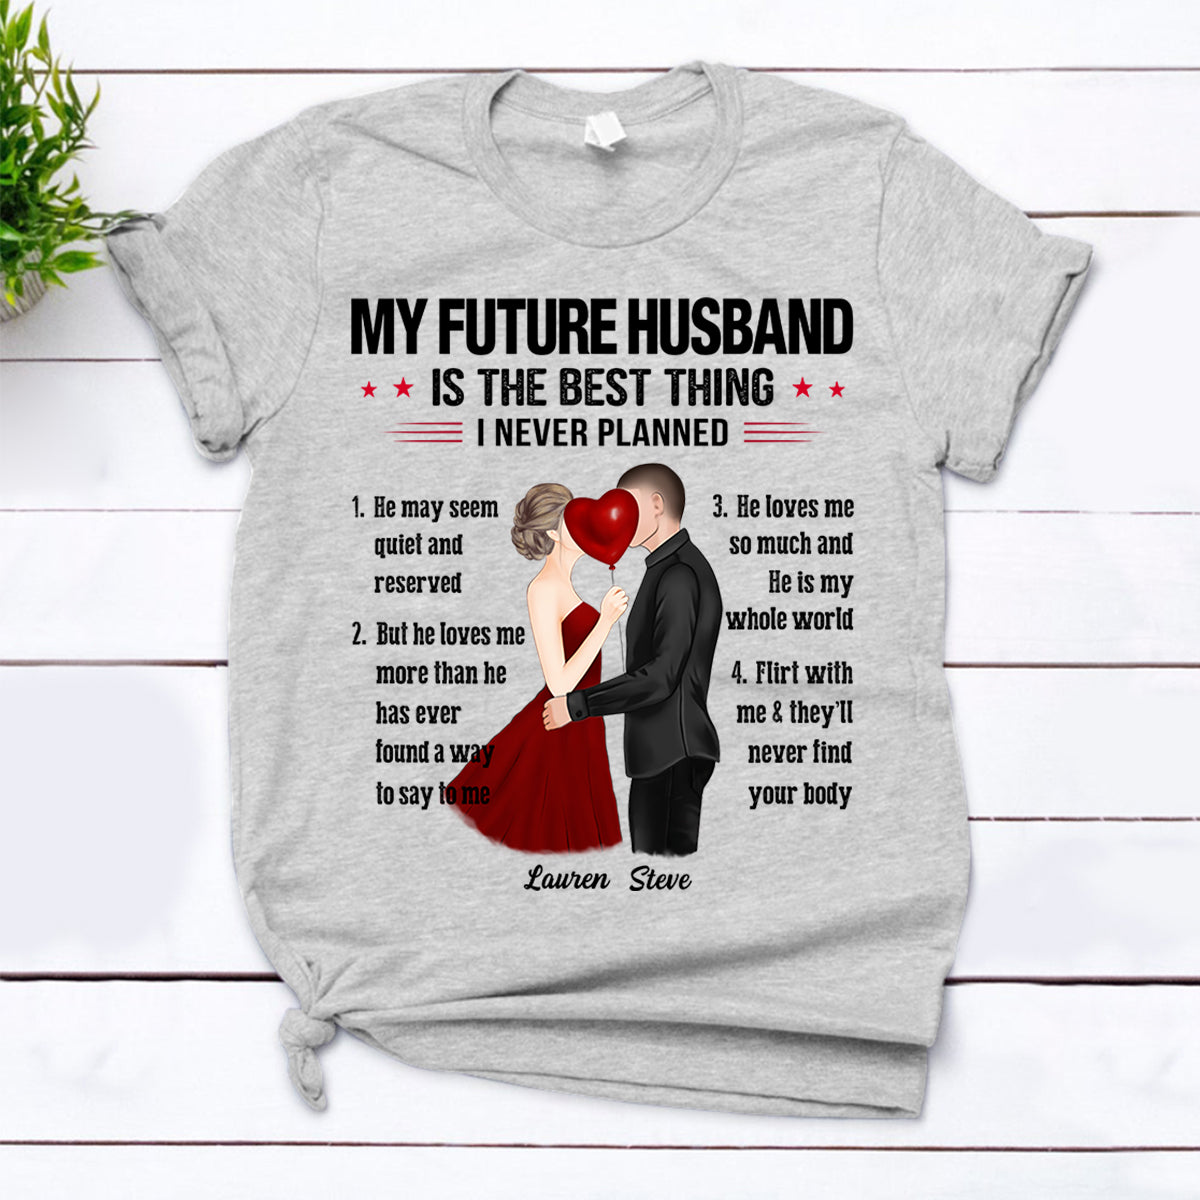 My Future Husband is the Best Thing I Never Planned, Best Gift for your Future Wife, Anniversary Gift HG98 HUTS